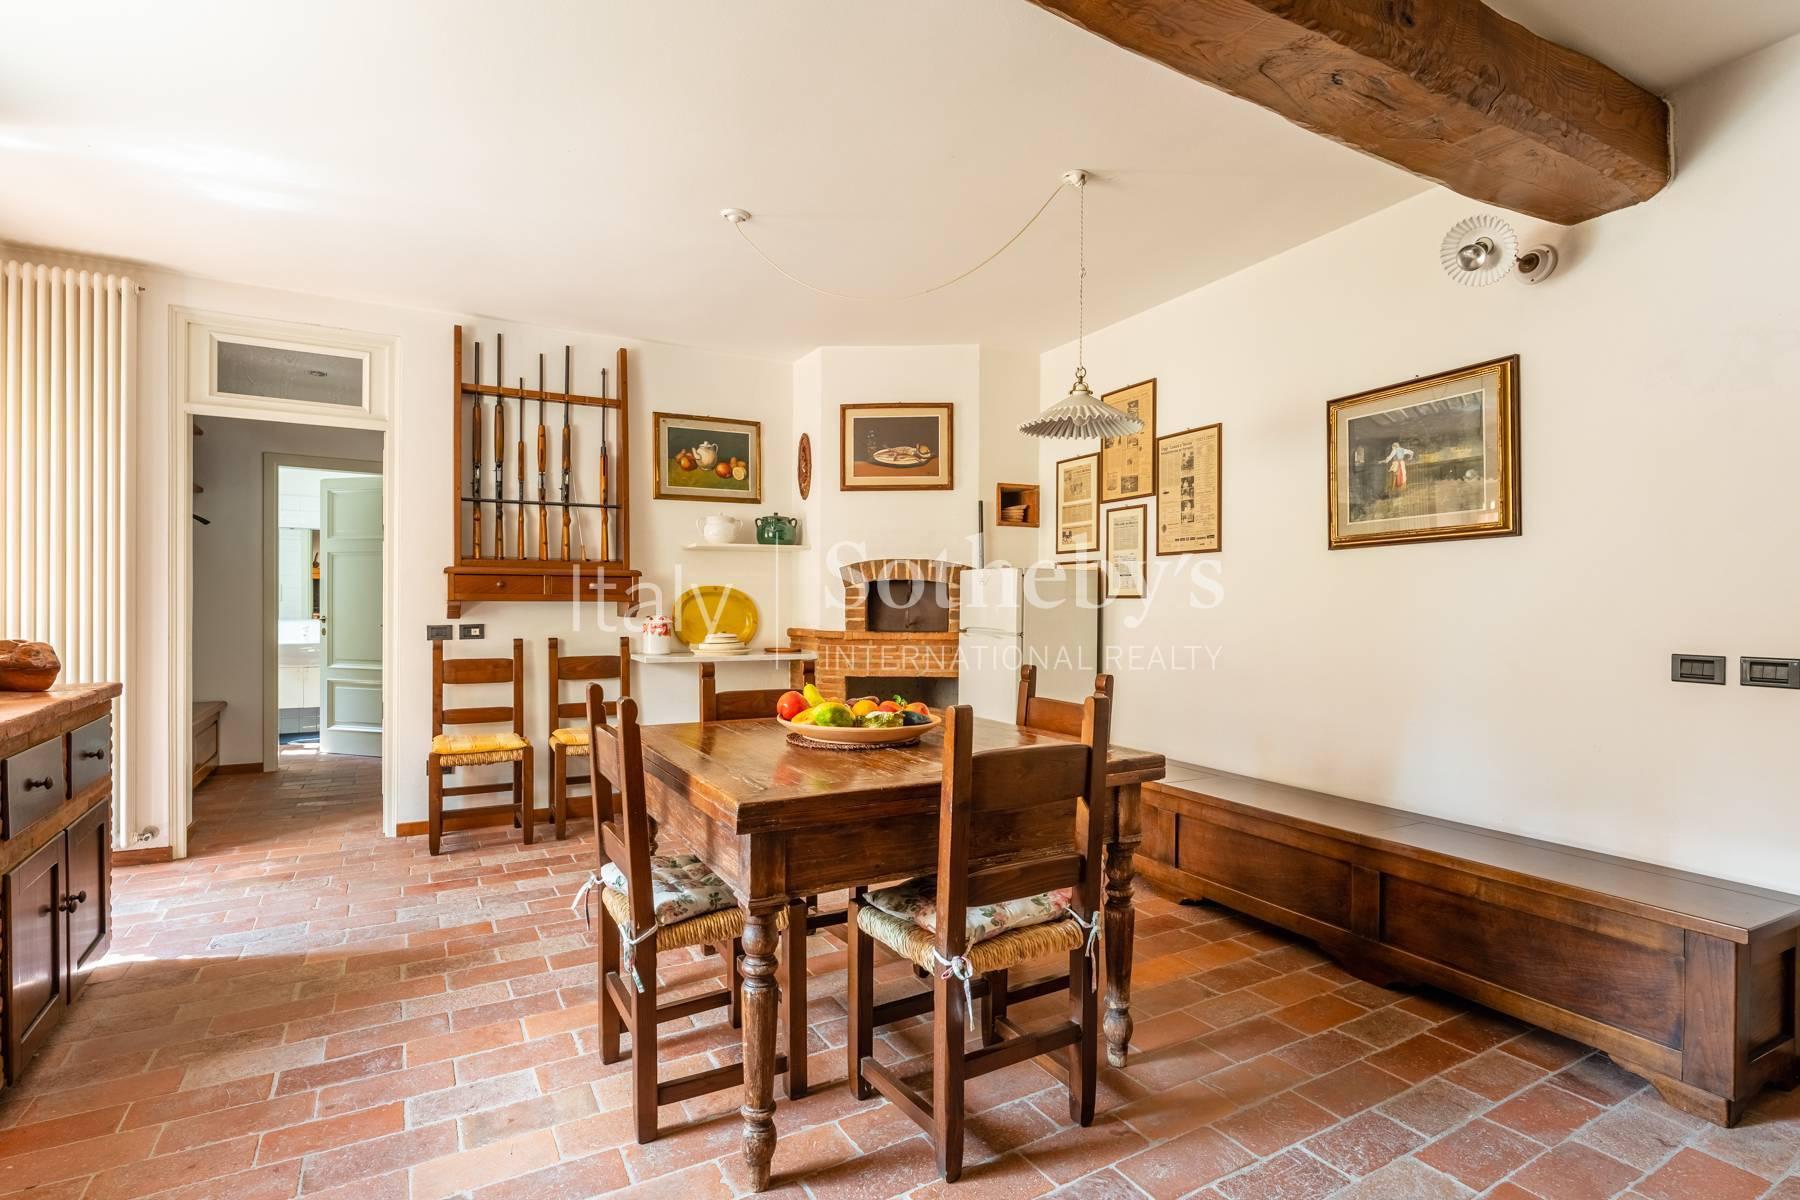 Charming Villa a few km from Lucca - 12